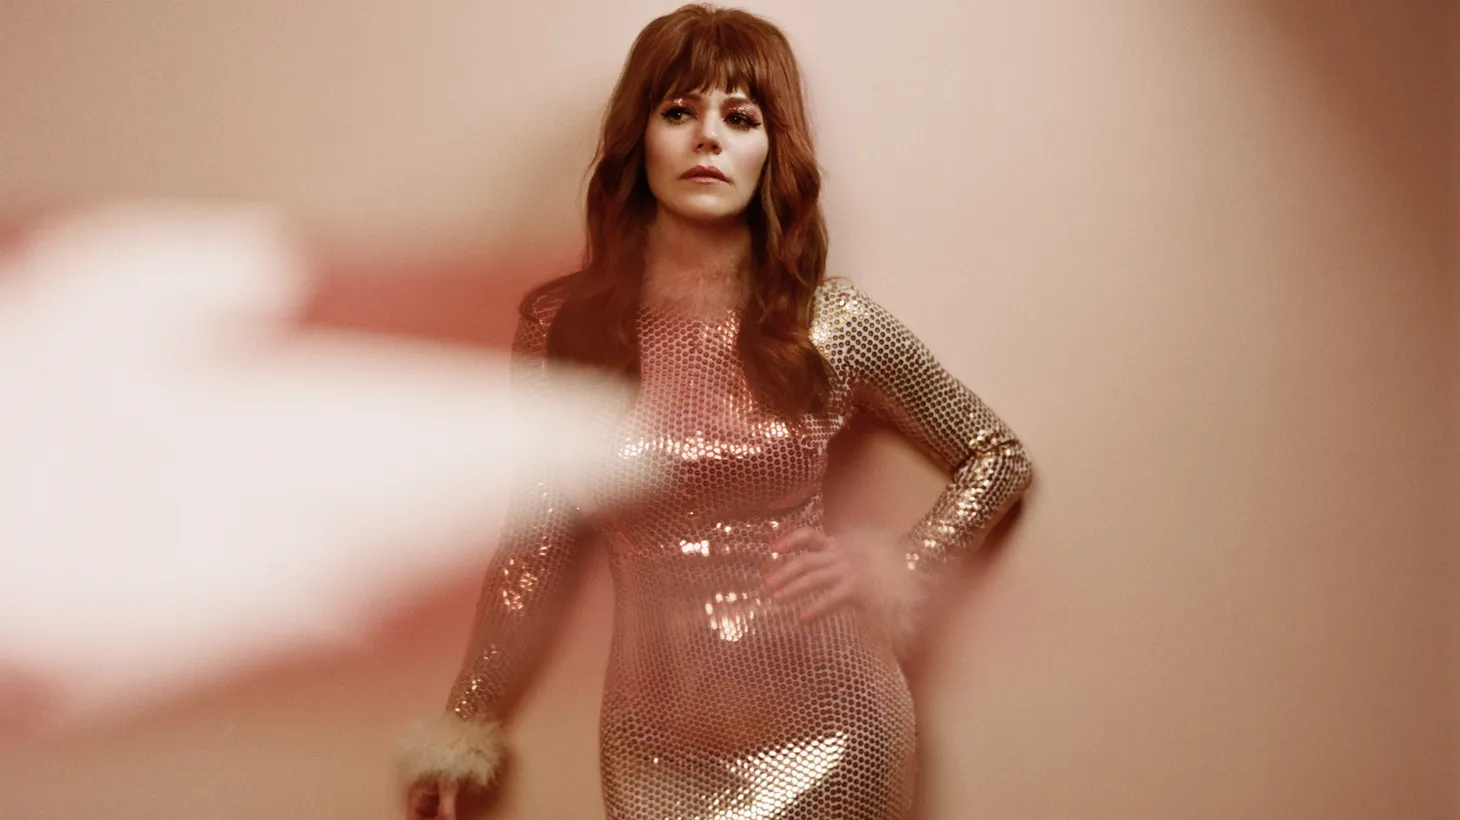 Jenny Lewis' voice is as alluring as her lyrics. At times punchy and defiant, but always warm and honest. On her new album "On The Line," she delivers piano-driven songs with hints of country under tones